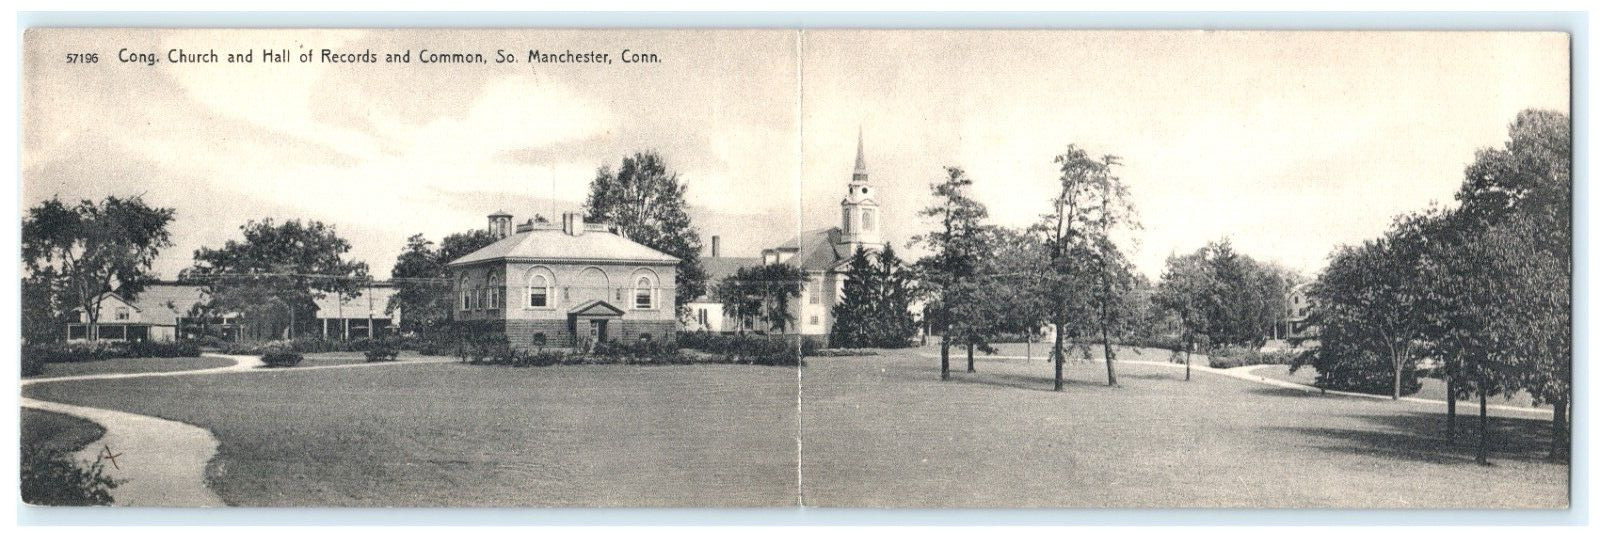 1907 Cong. Church Records South Manchester CT Connecticut Panoramic Postcard